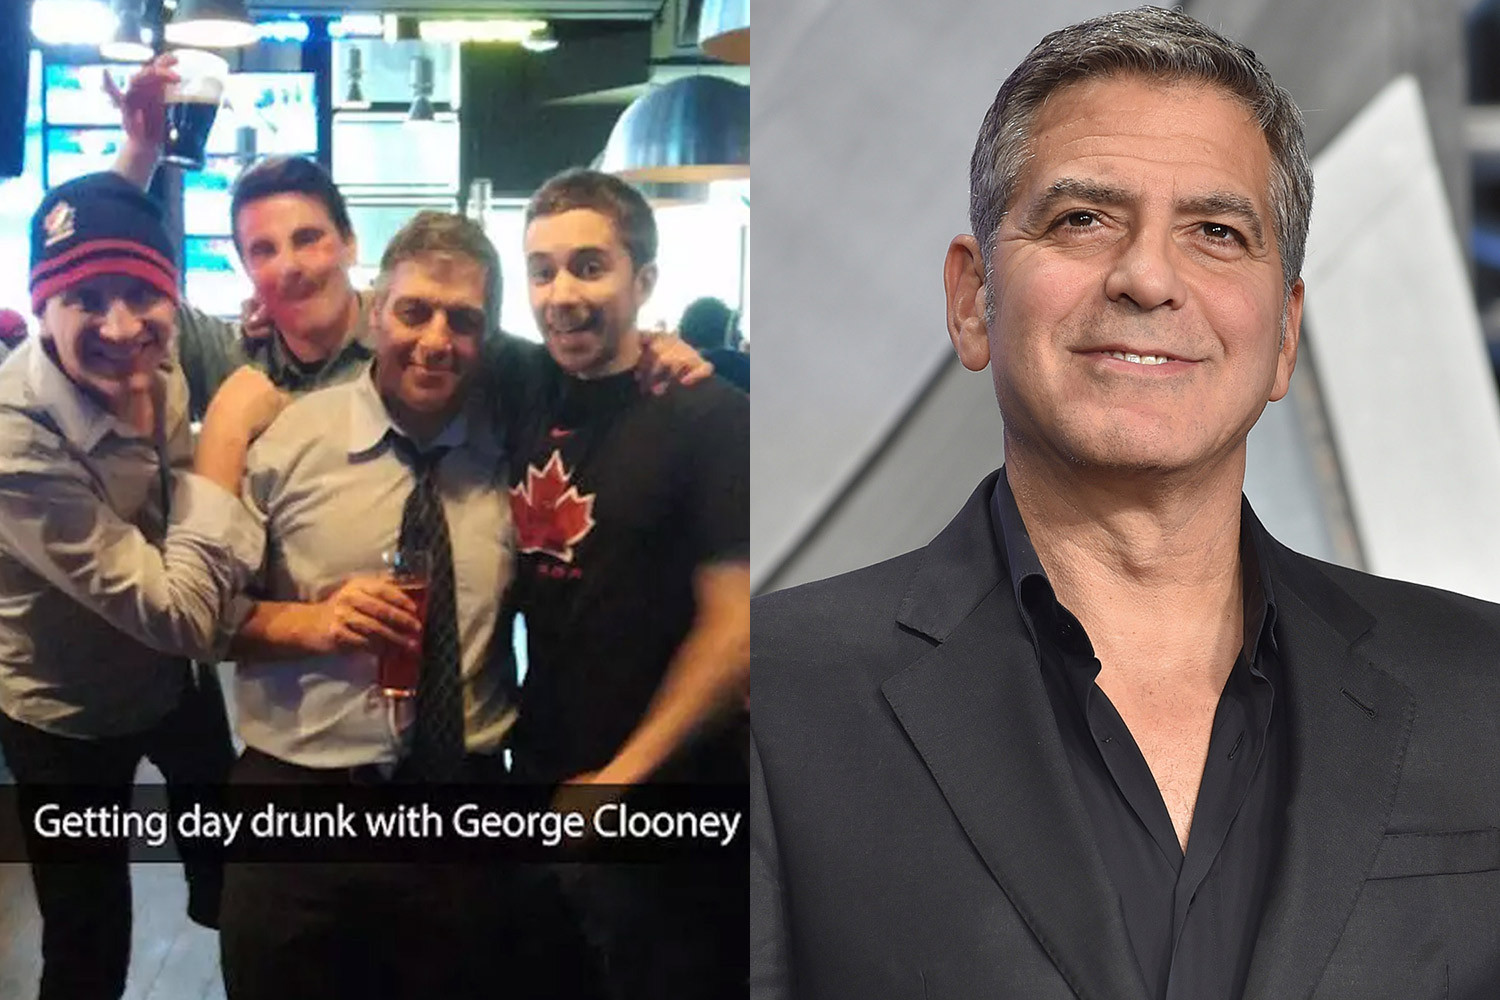 george clooney drunk - Getting day drunk with George Clooney